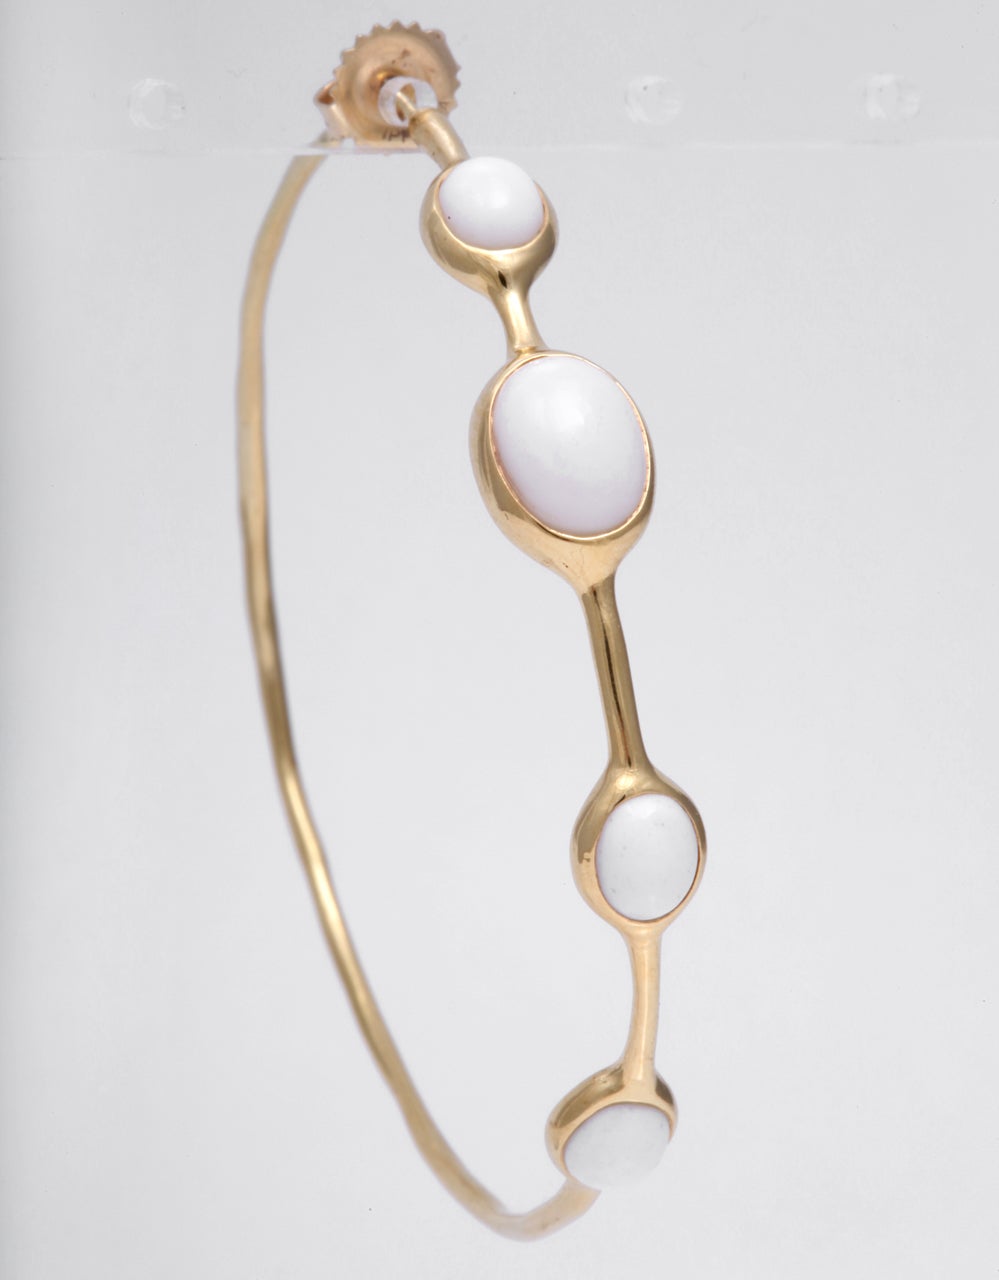 Signed Ippolita, this rock candy hoop earrings are crafted in 18k gold.